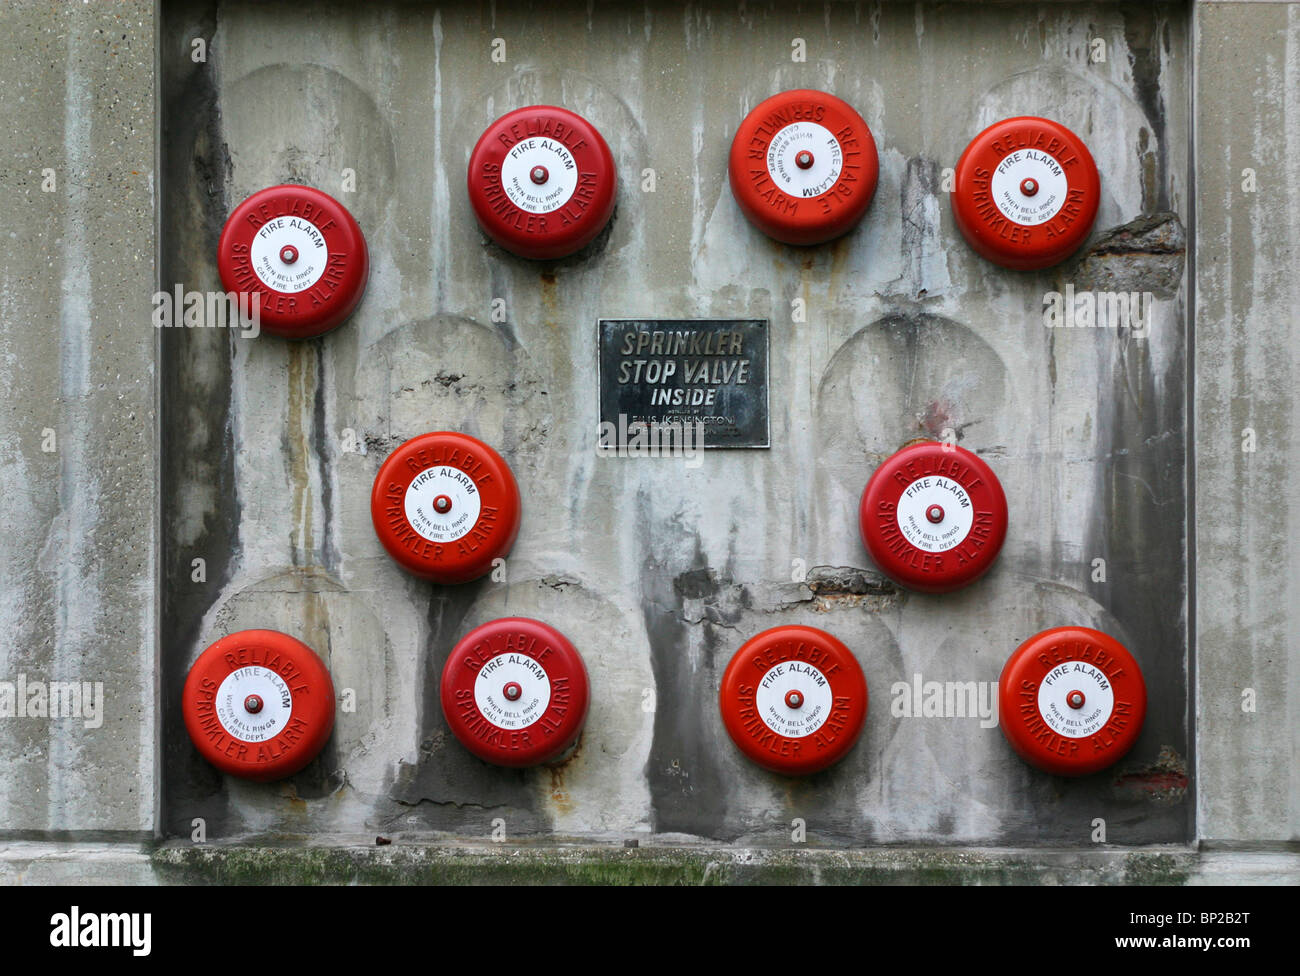 Ten red and white fire alarms on a grey concrete wall in London, UK. Stock Photo